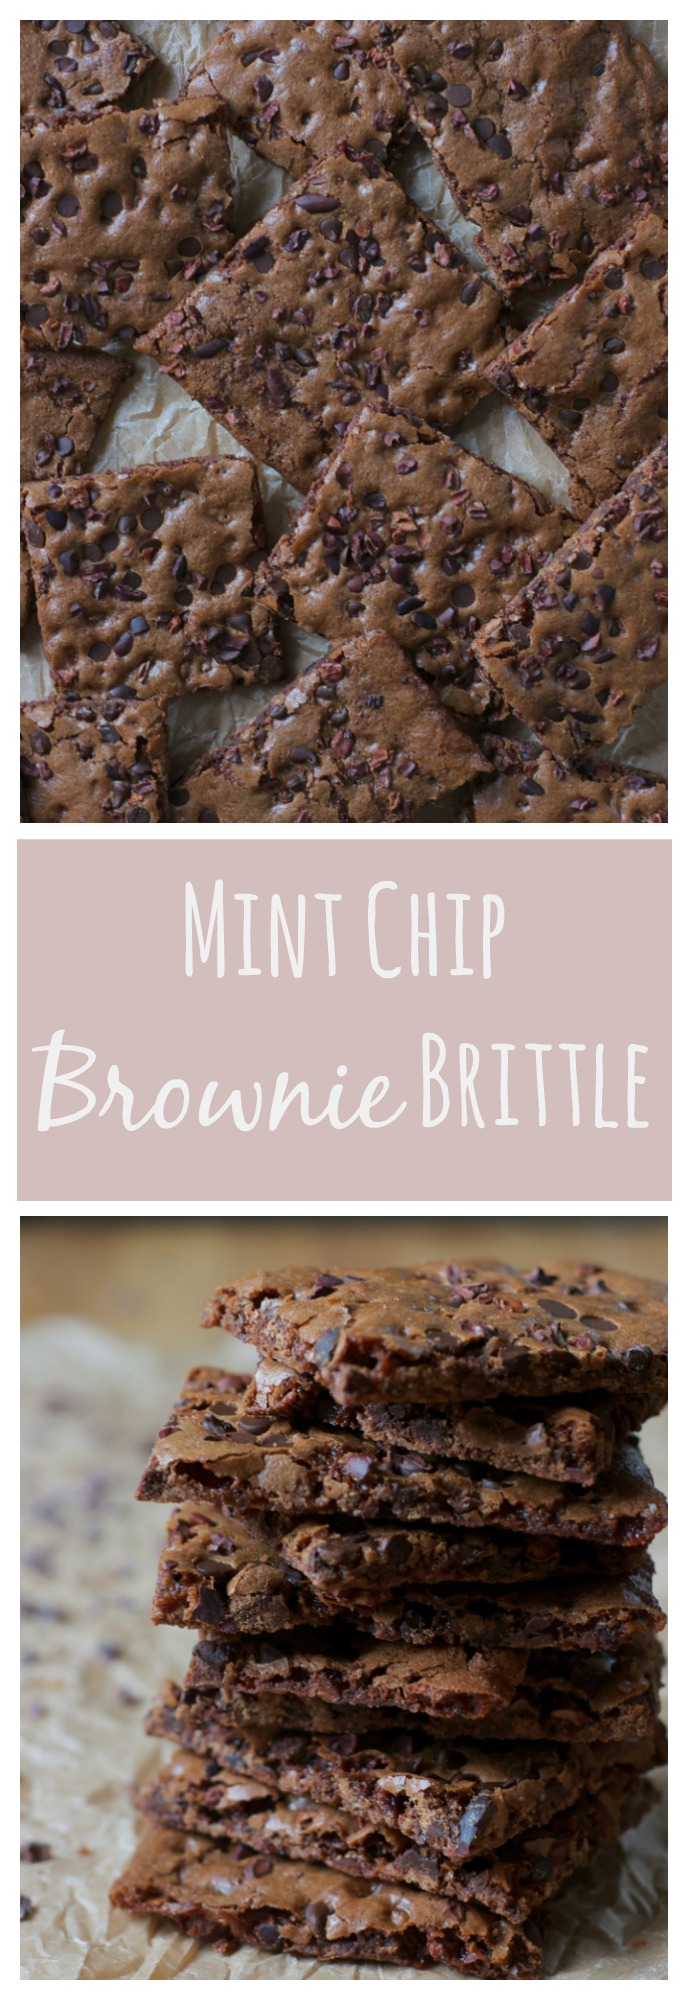 Ultra-thin, shatteringly crisp, and super chocolatey, this mint chip brownie brittle is totally irresistible! It makes a wonderful gift, too, if you don't devour it all first!